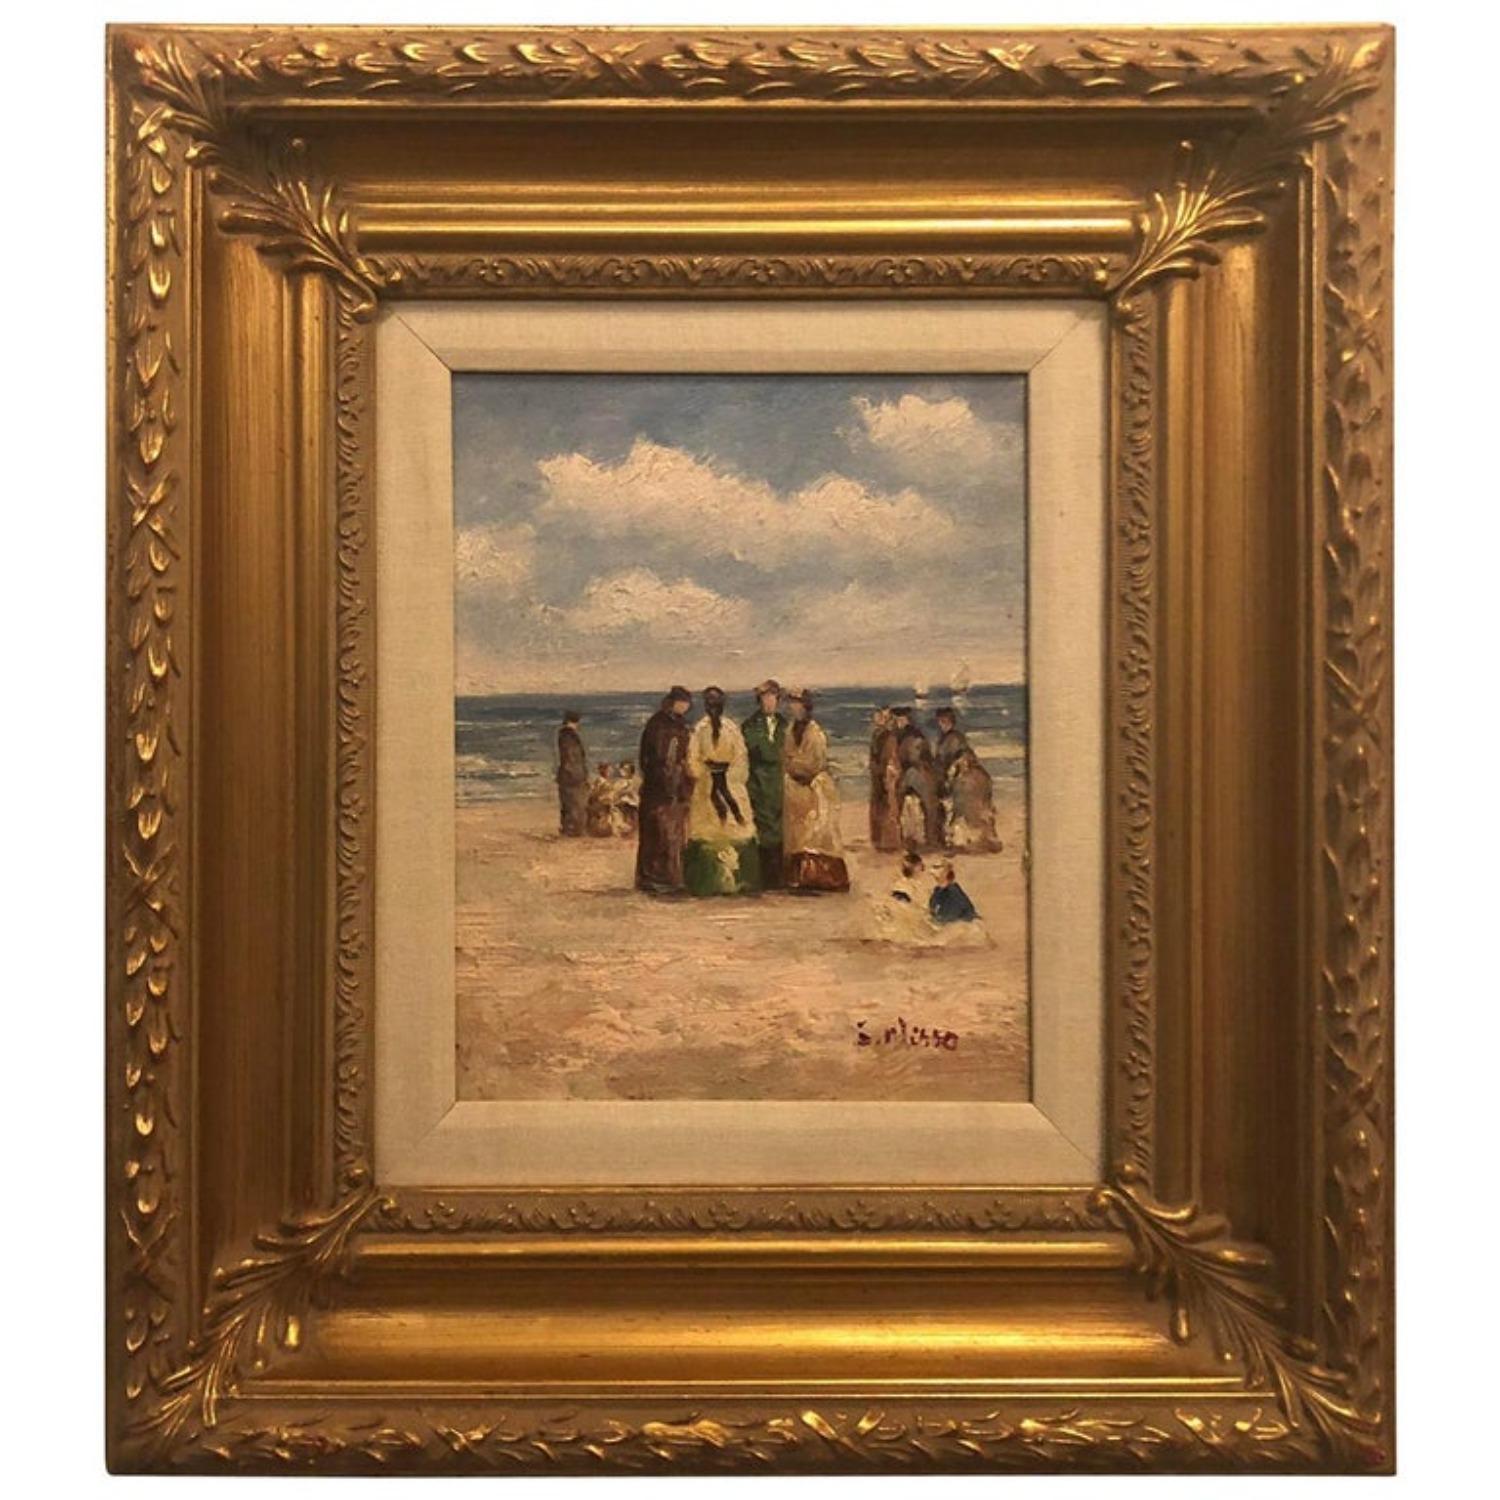 1980's Oil on Canvas Impressionistic Beach Scene Painting, Framed & Signed